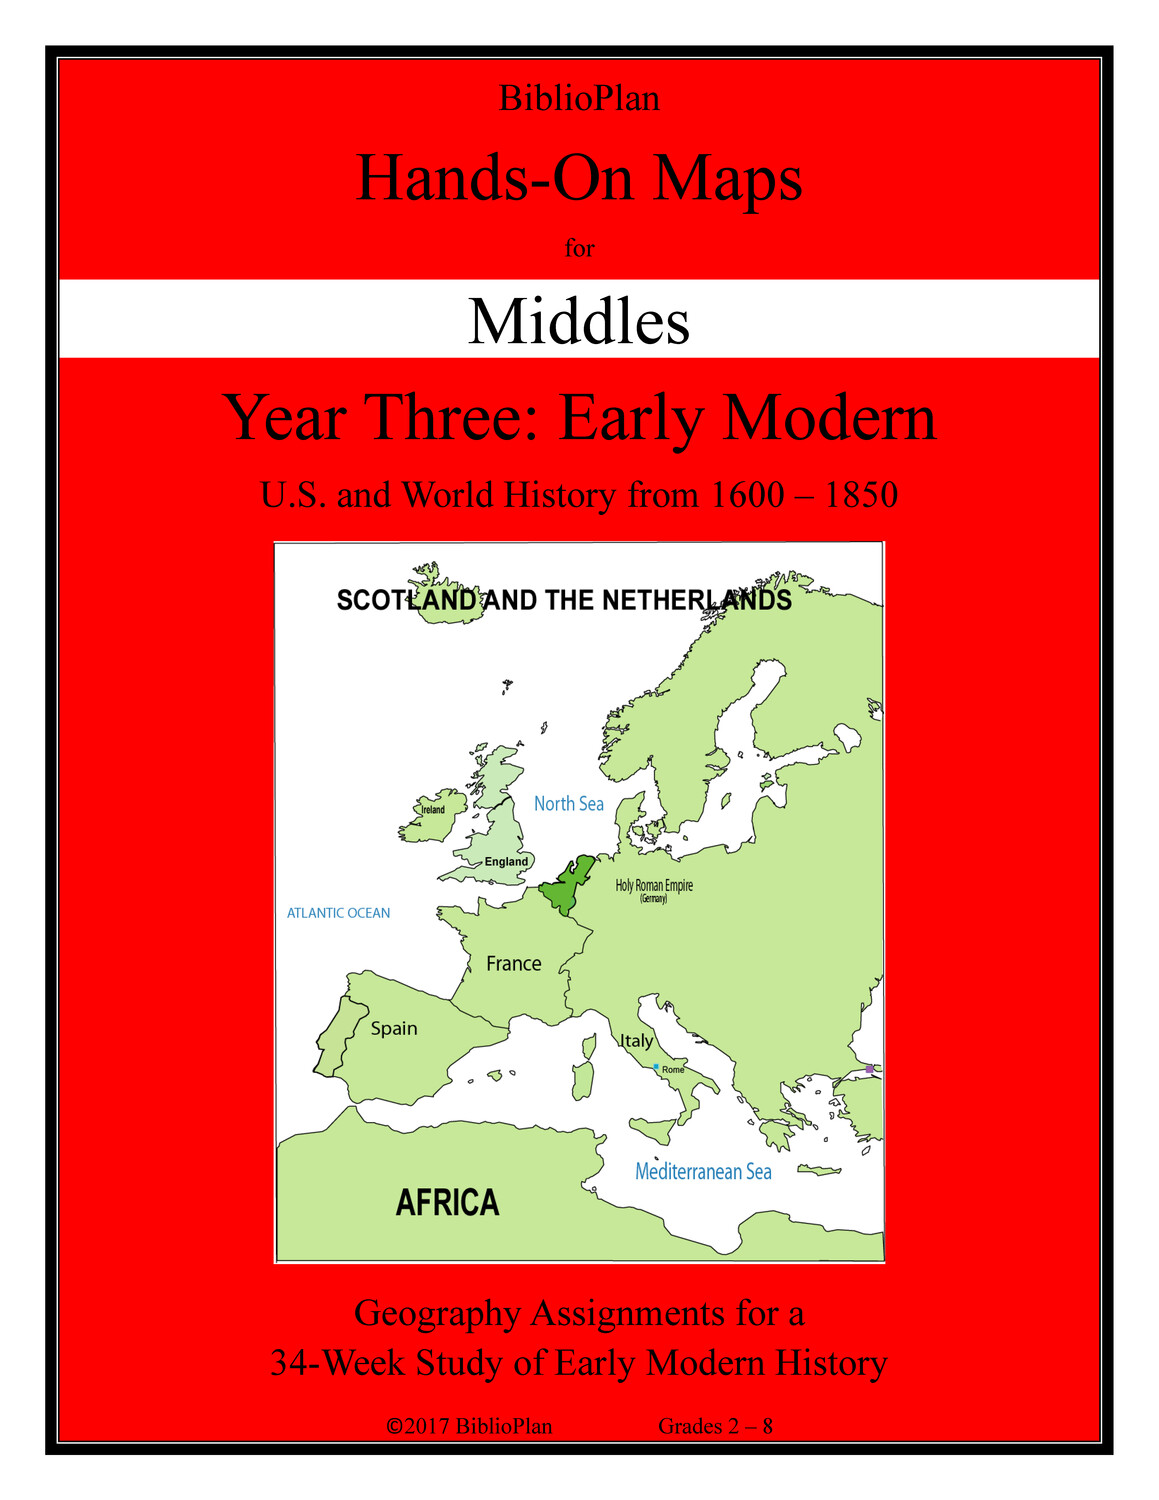 Early Modern Hands-On Maps for Middles Ebook